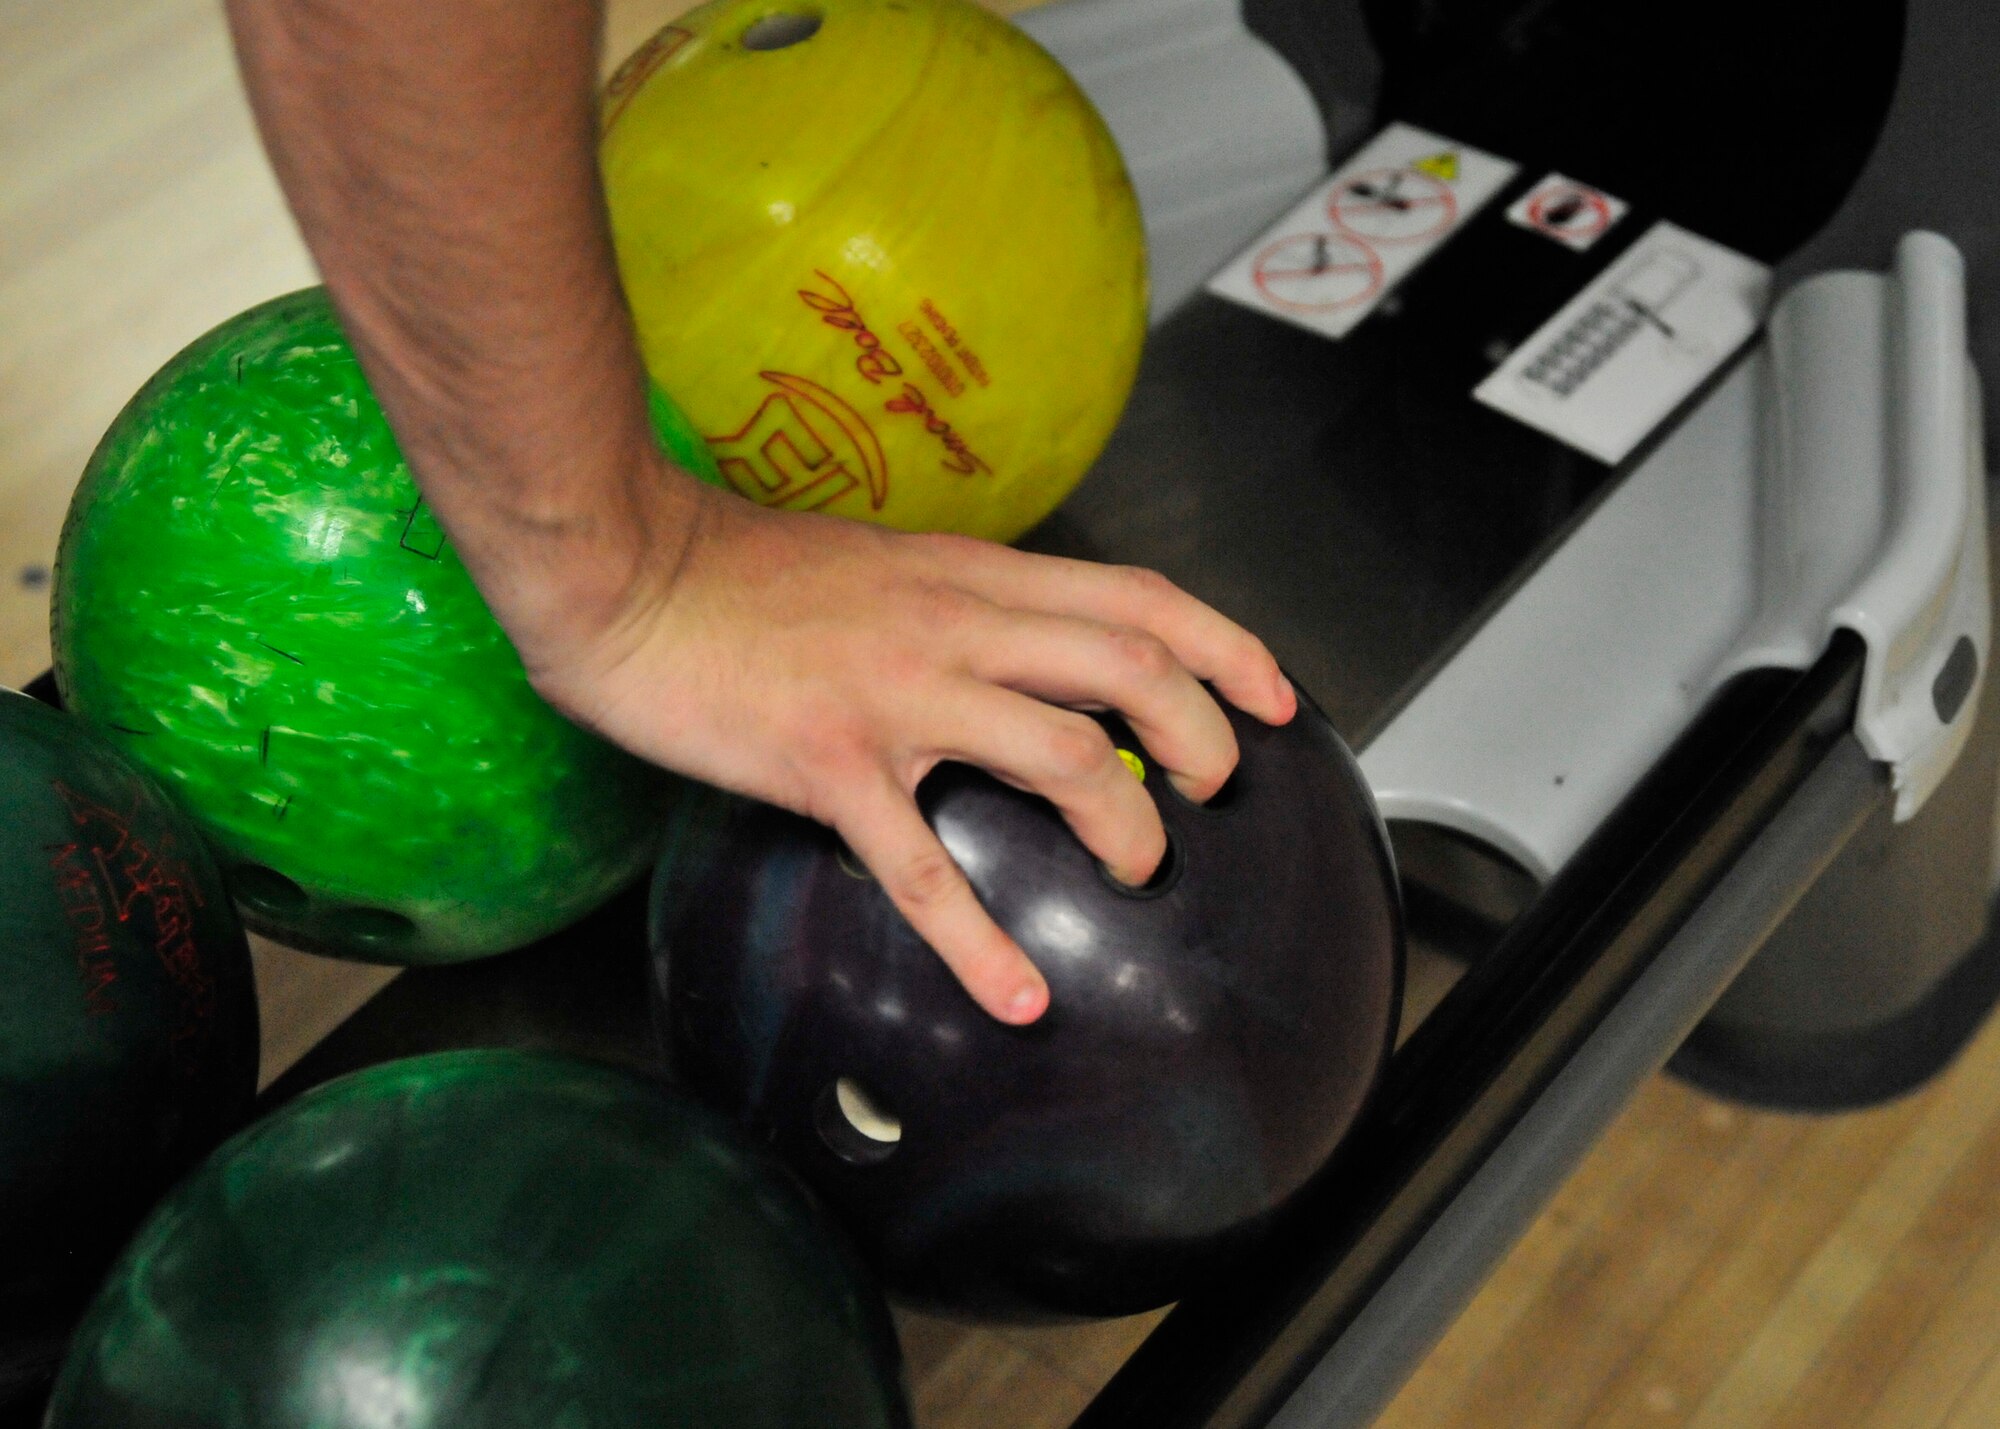 A Team Dover Airman picks his ball of choice to use during a bowling competition during Wingman Day May 22, 2014, at the Eagle Lanes Bowling Center on Dover Air Force Base, Del. Teams were limited to 4 people and the total cumulative score for the team got recorded as the team score. (U.S. Air Force photo/Staff Sgt. Elizabeth Morris)